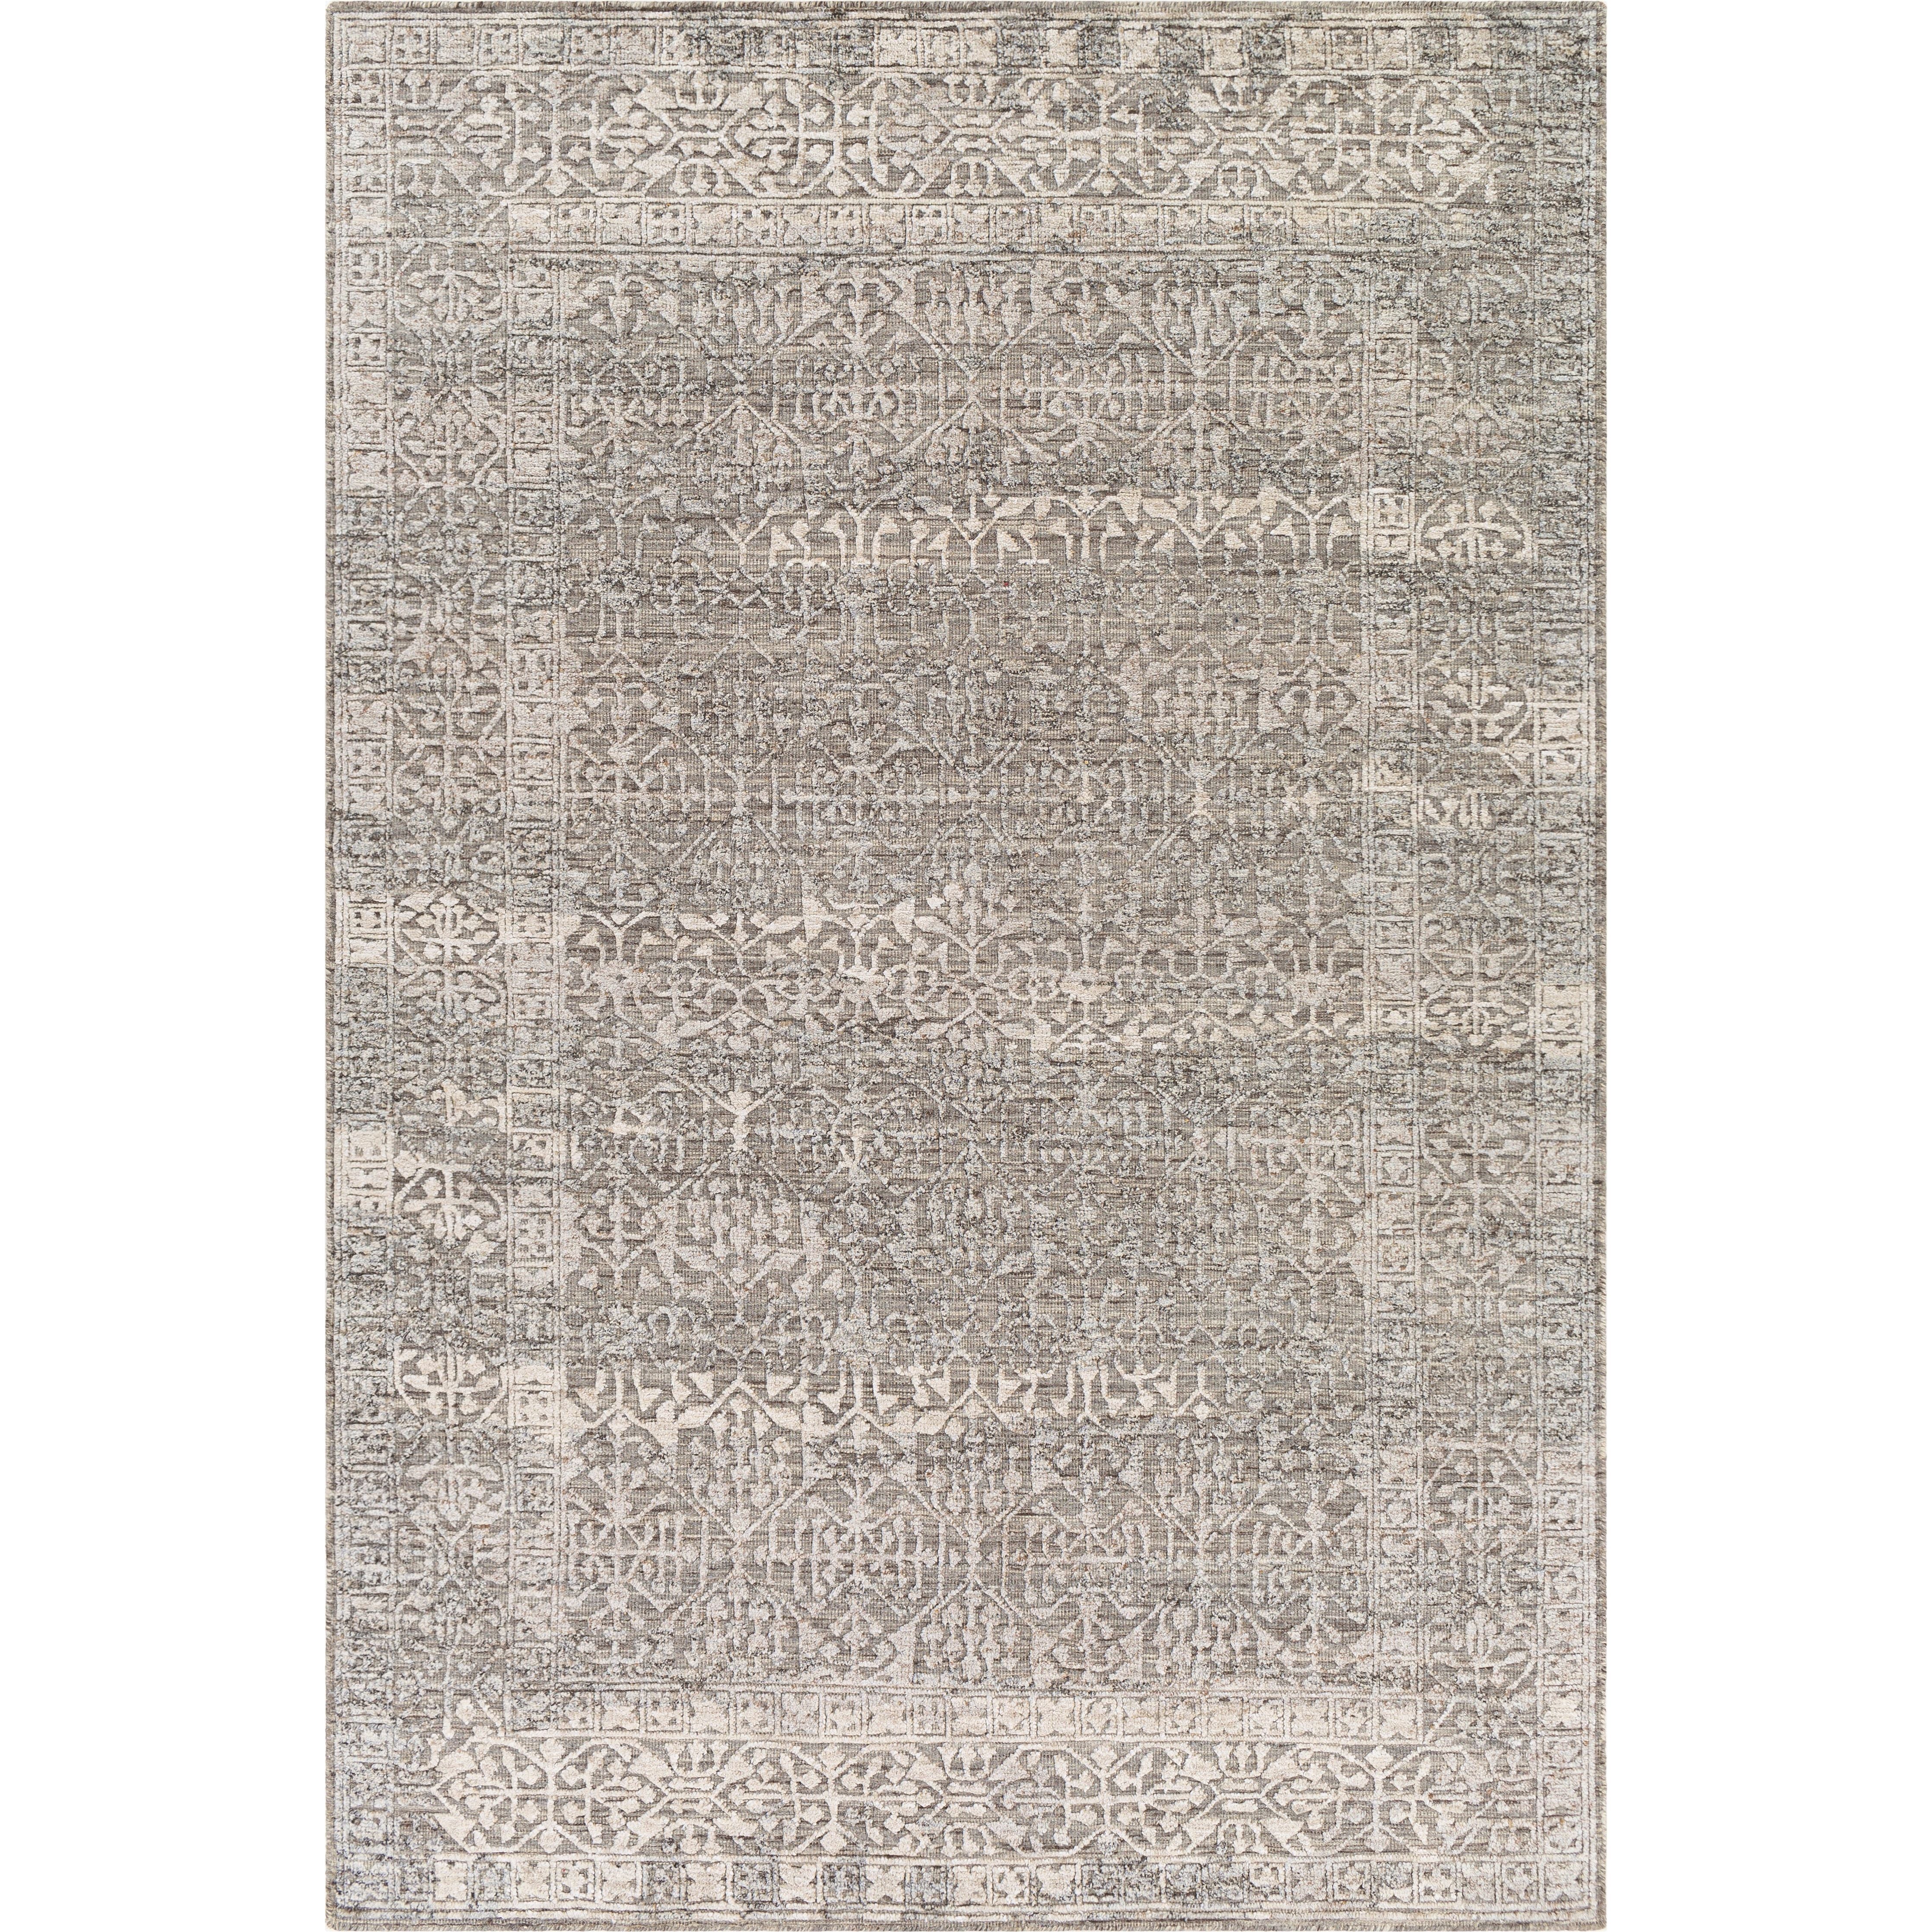 The Tunus Silver Rug features a globally inspired design made from wool. The hand-knotted rug adds wabi sabi charm to any room. Amethyst Home provides interior design, new home construction design consulting, vintage area rugs, and lighting in the Kansas City metro area.